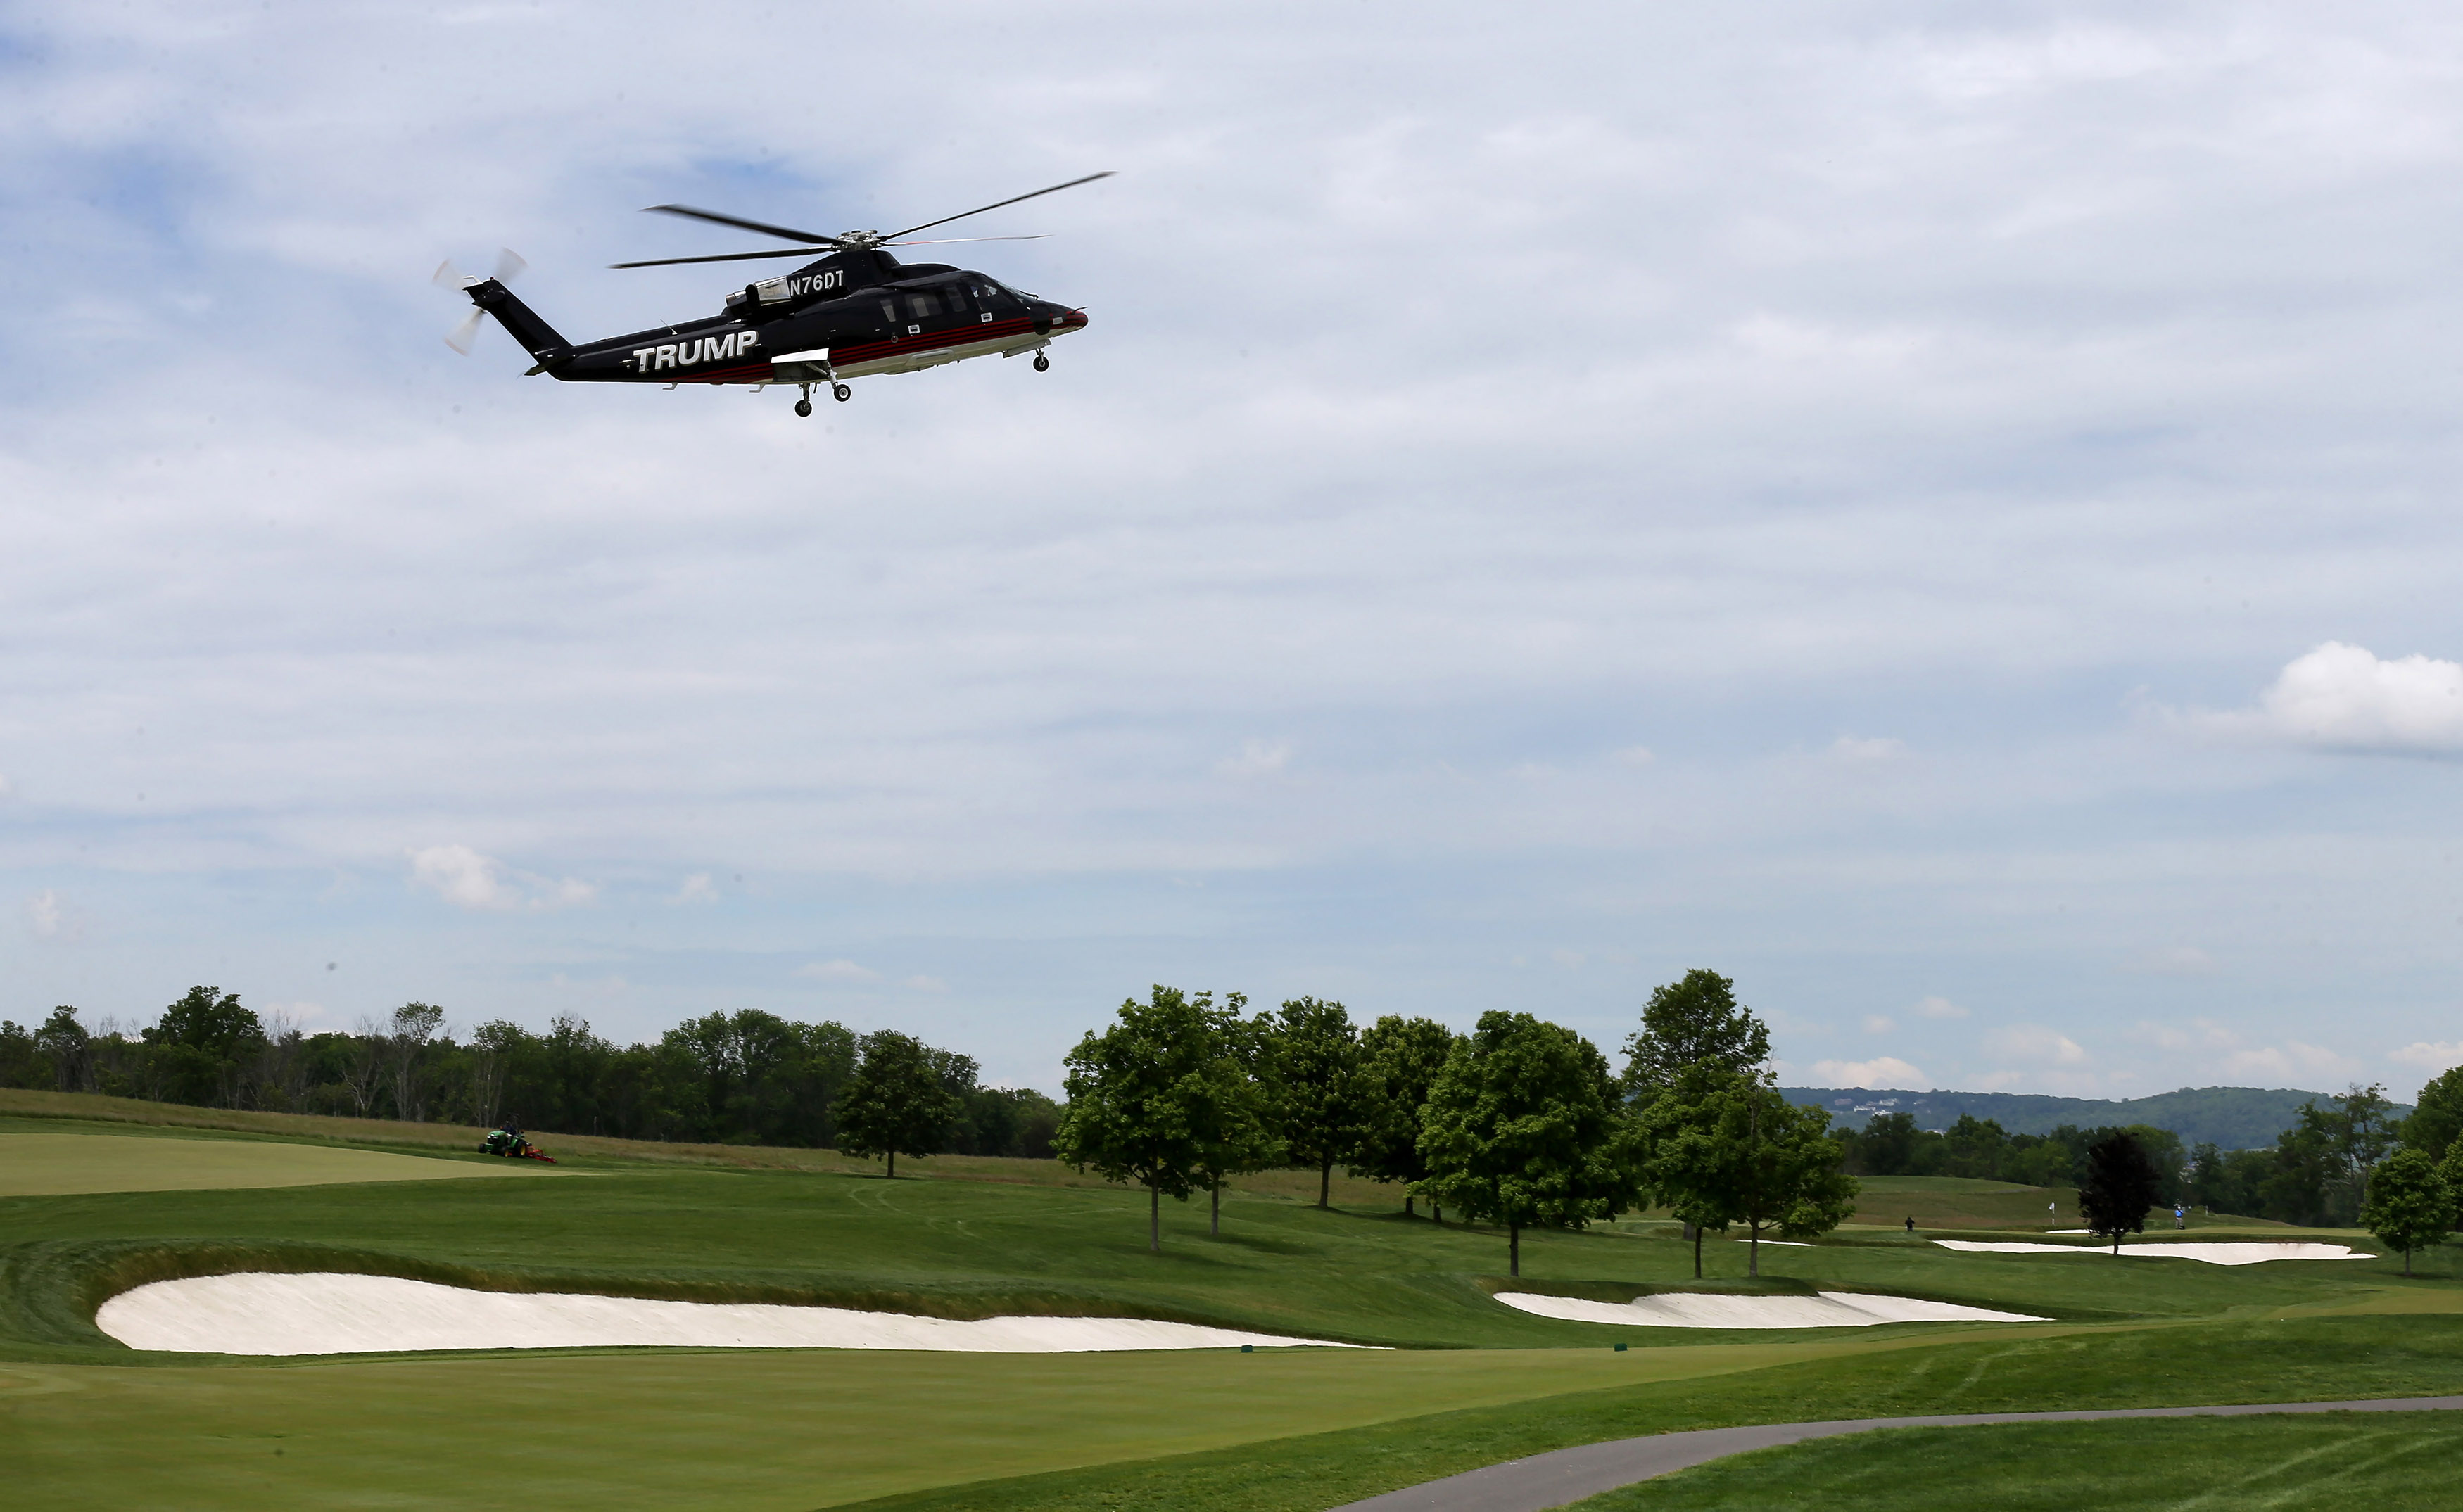 A Trump helicopter arrives to pick up Donald Trump Jr. and Eric Trump as Trump National Golf Club previews the US Women's Open Golf tournament in Bedminster, New Jersey. Photo courtesy of John Munson, NJ Advance Media.